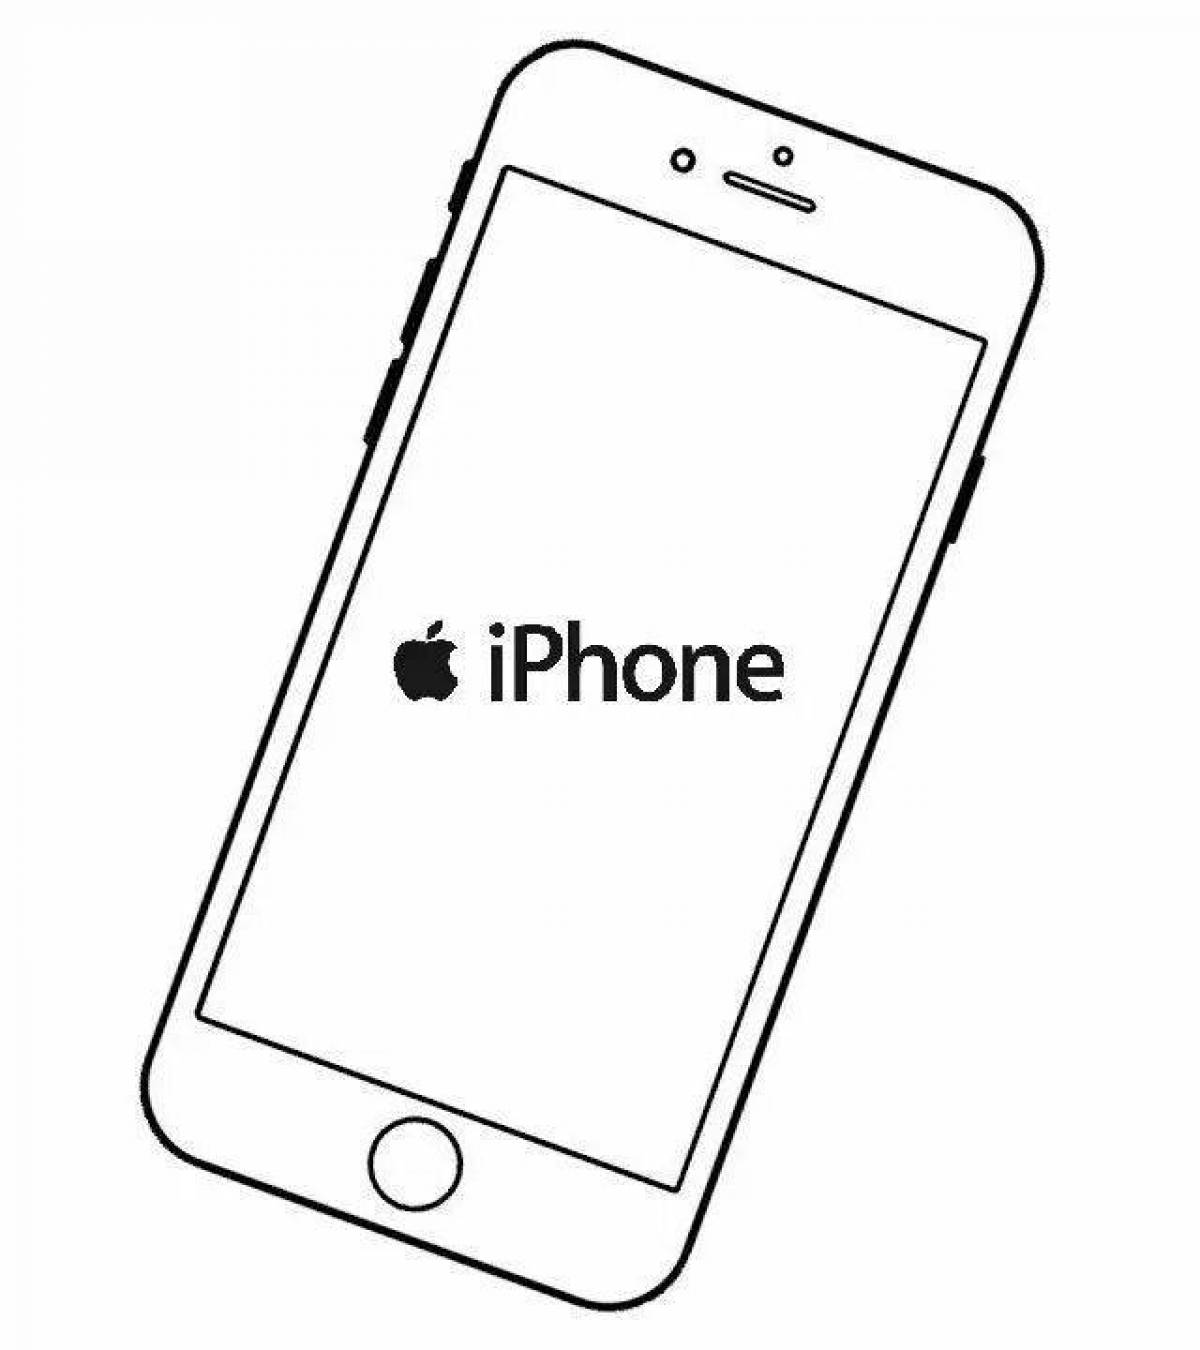 Adorable iphone coloring book